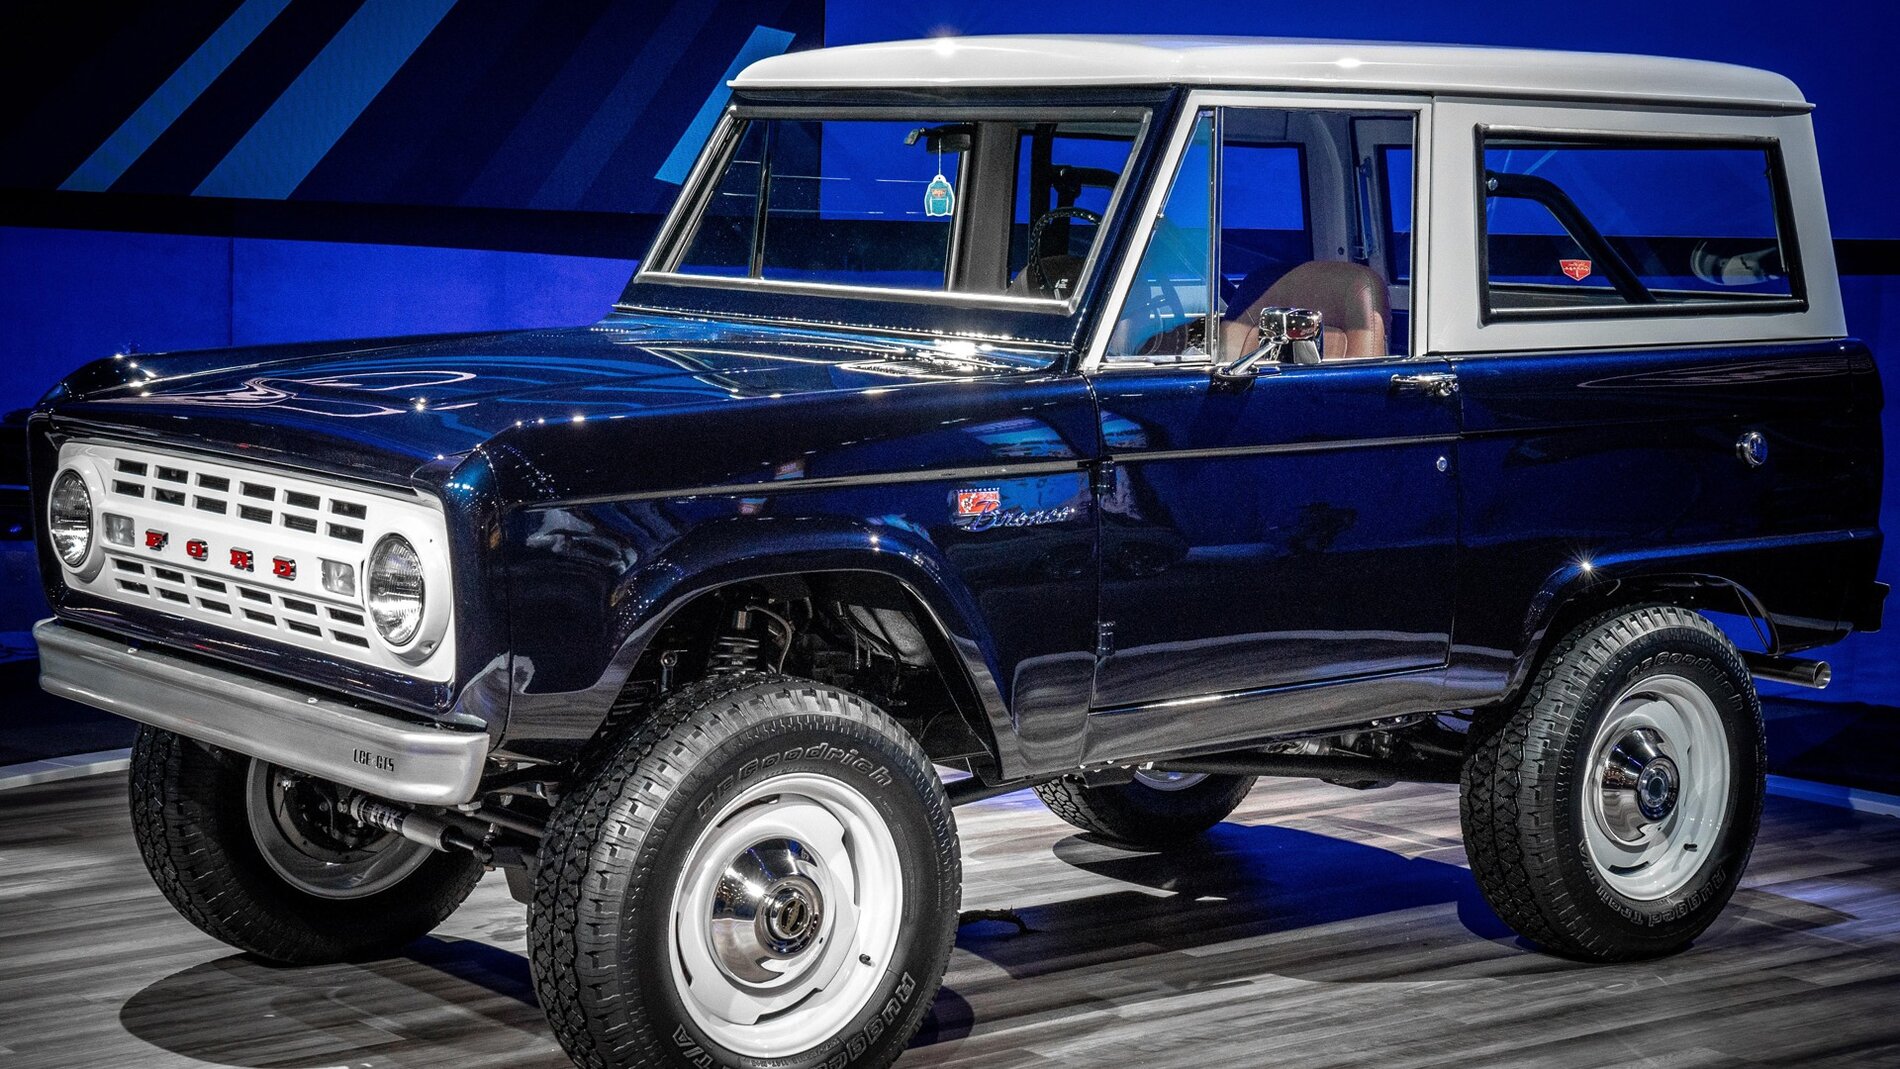 jay-lenos-1968-ford-bronco-restored-by-lge-cts-motorsports_100723077.jpg